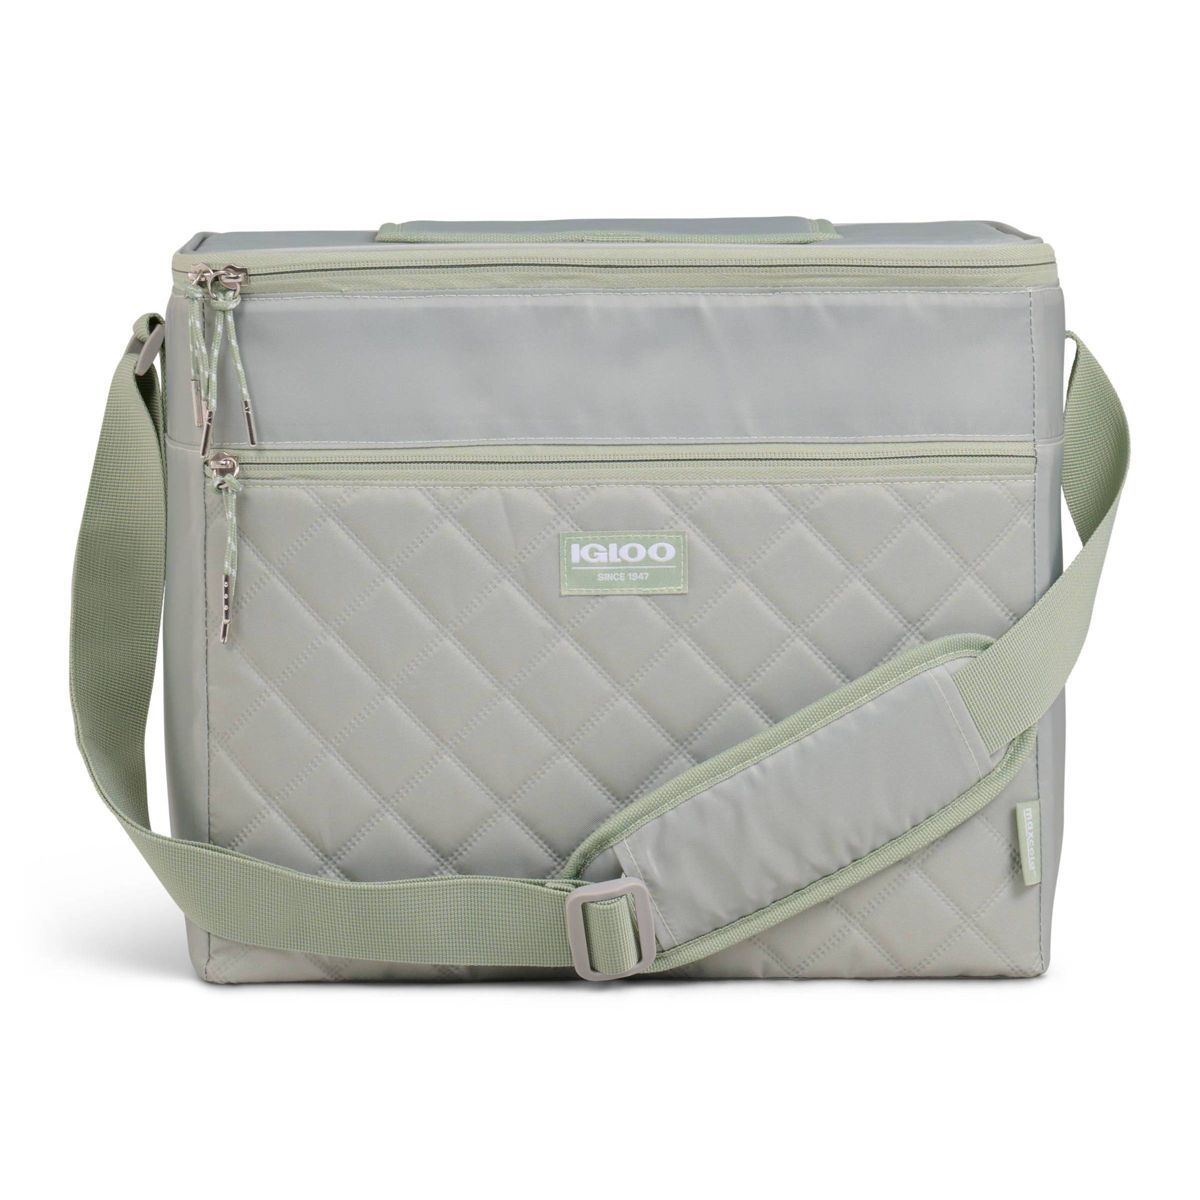 Igloo MaxCold Duo HLC 28 Soft-Sided Cooler | Target